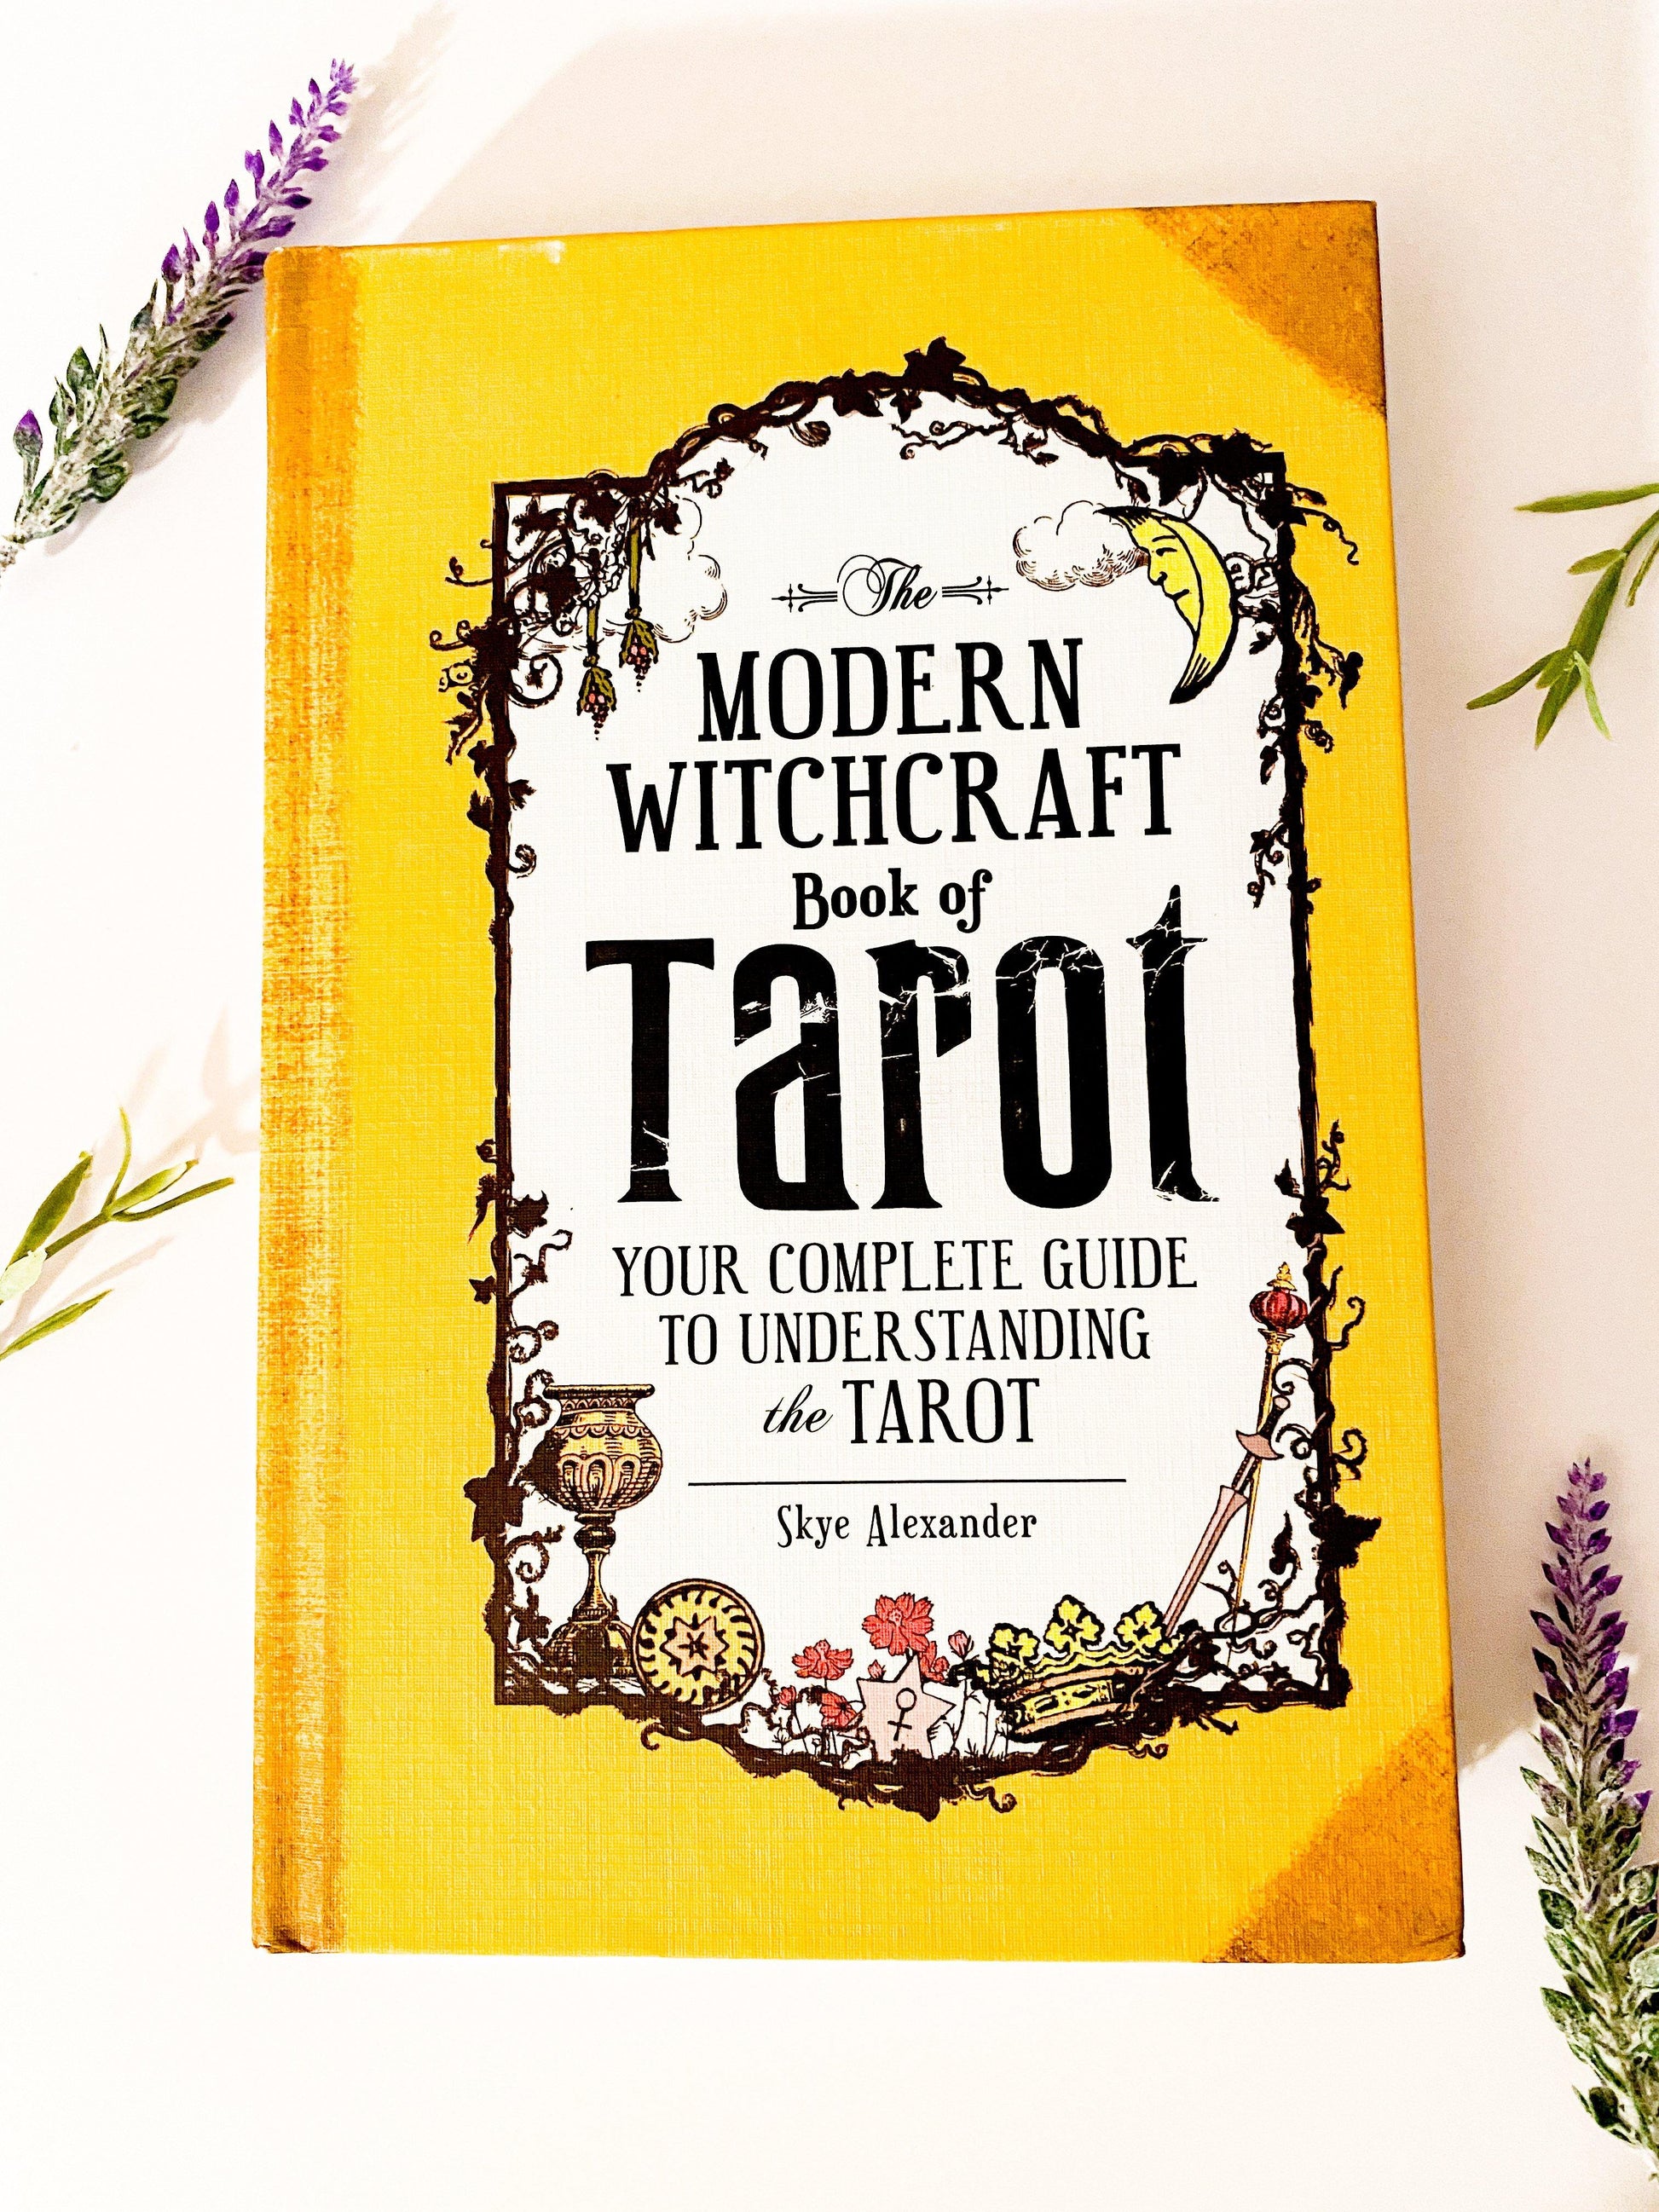 The Modern Witchcraft Book of Tarot: Your Complete Guide to Understanding the Tarot - Celestial 333